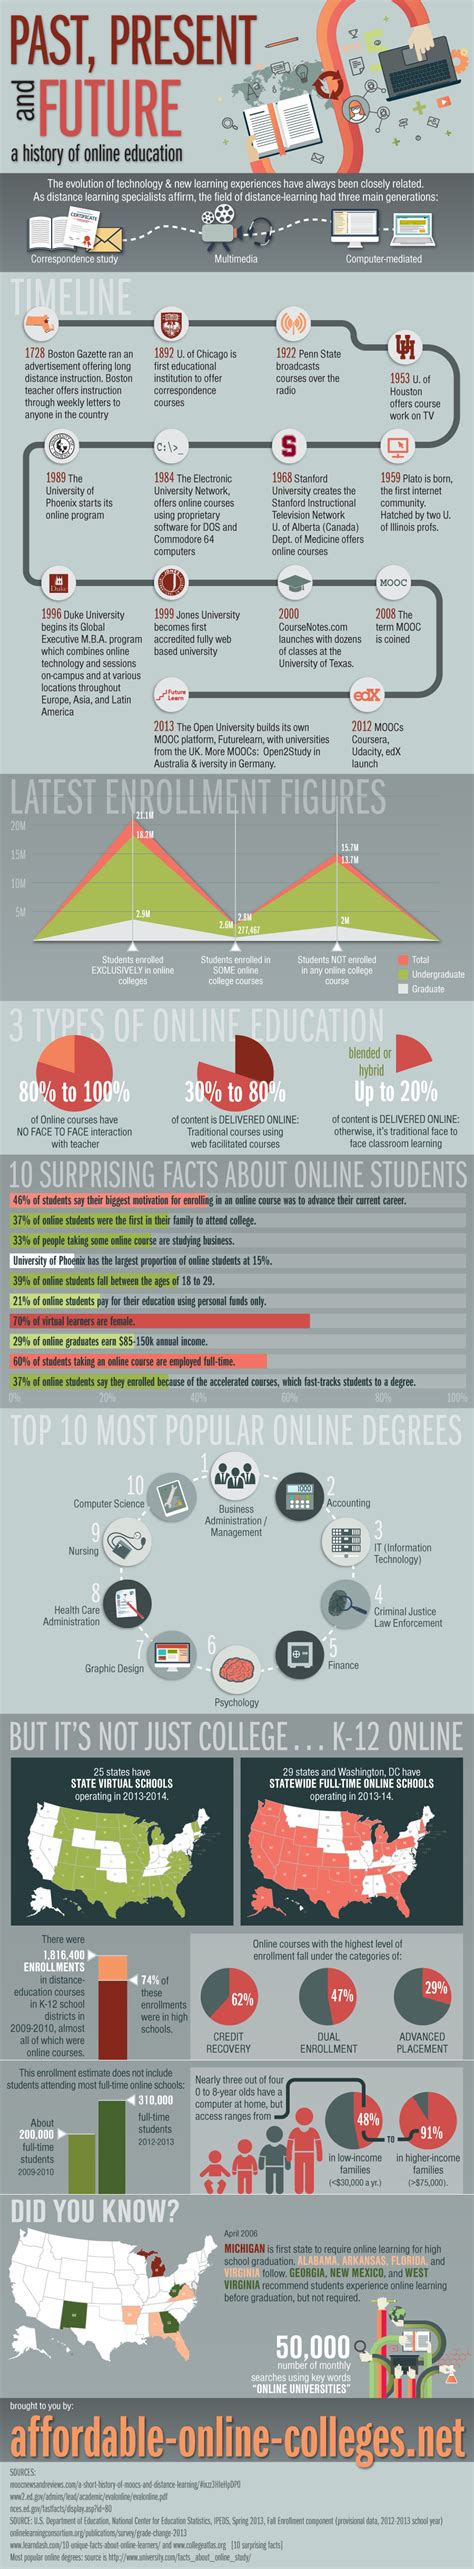 The History of Online Education Infographic